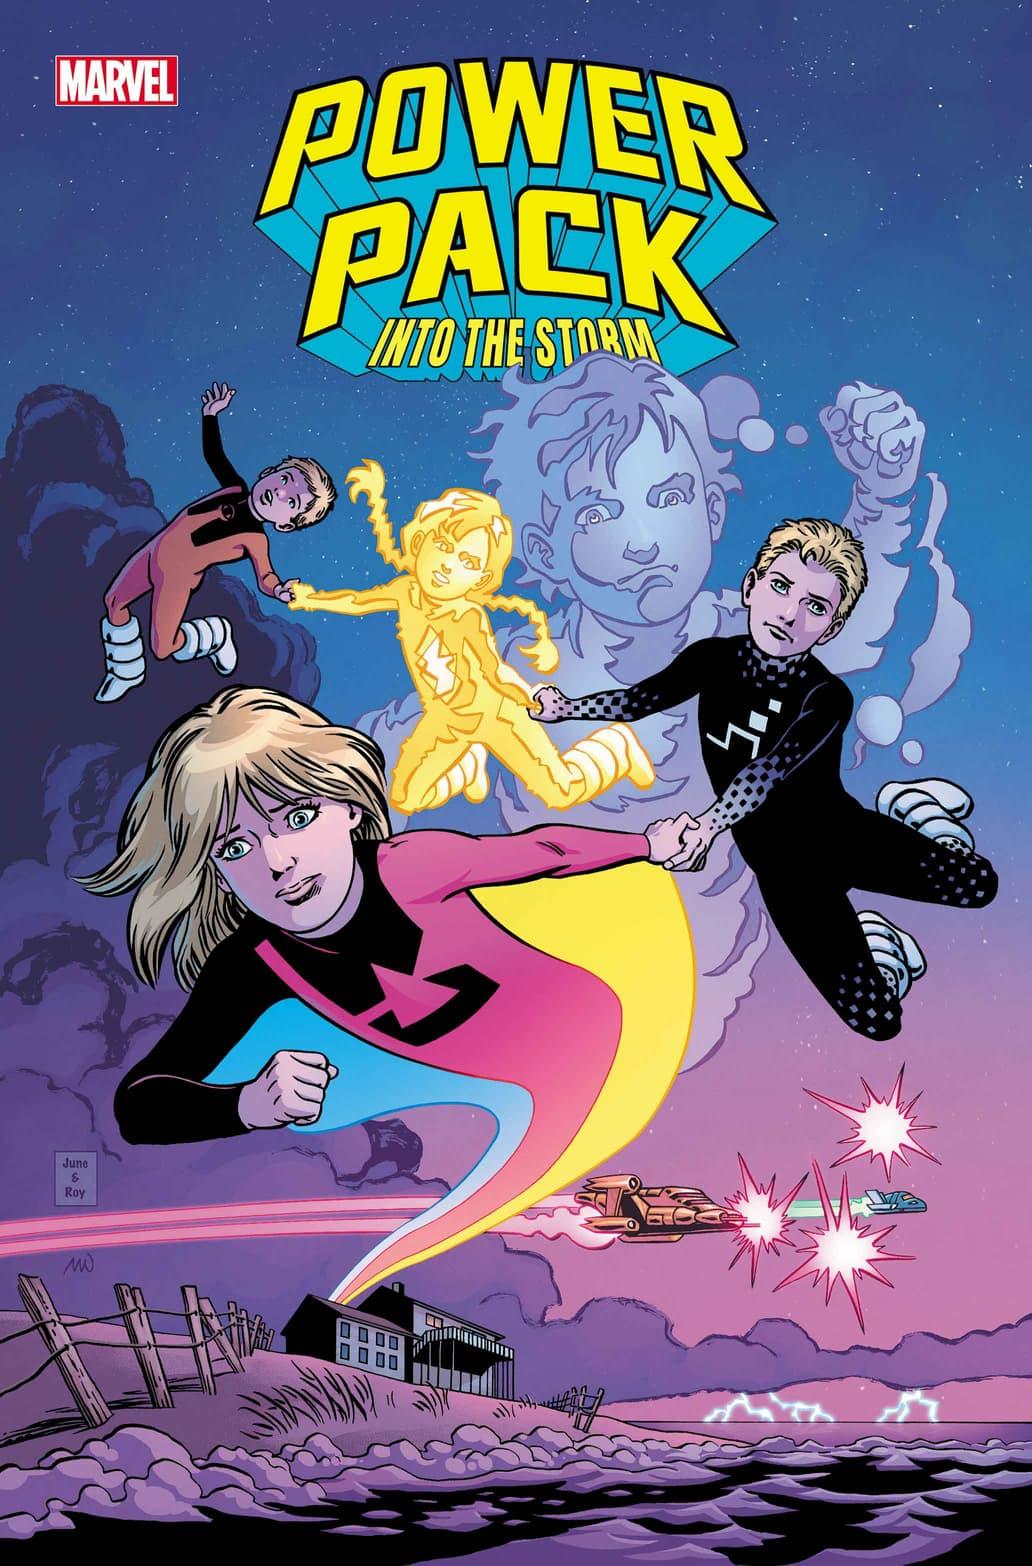 Marvel Announces New Power Pack Series From Louise Simonson and